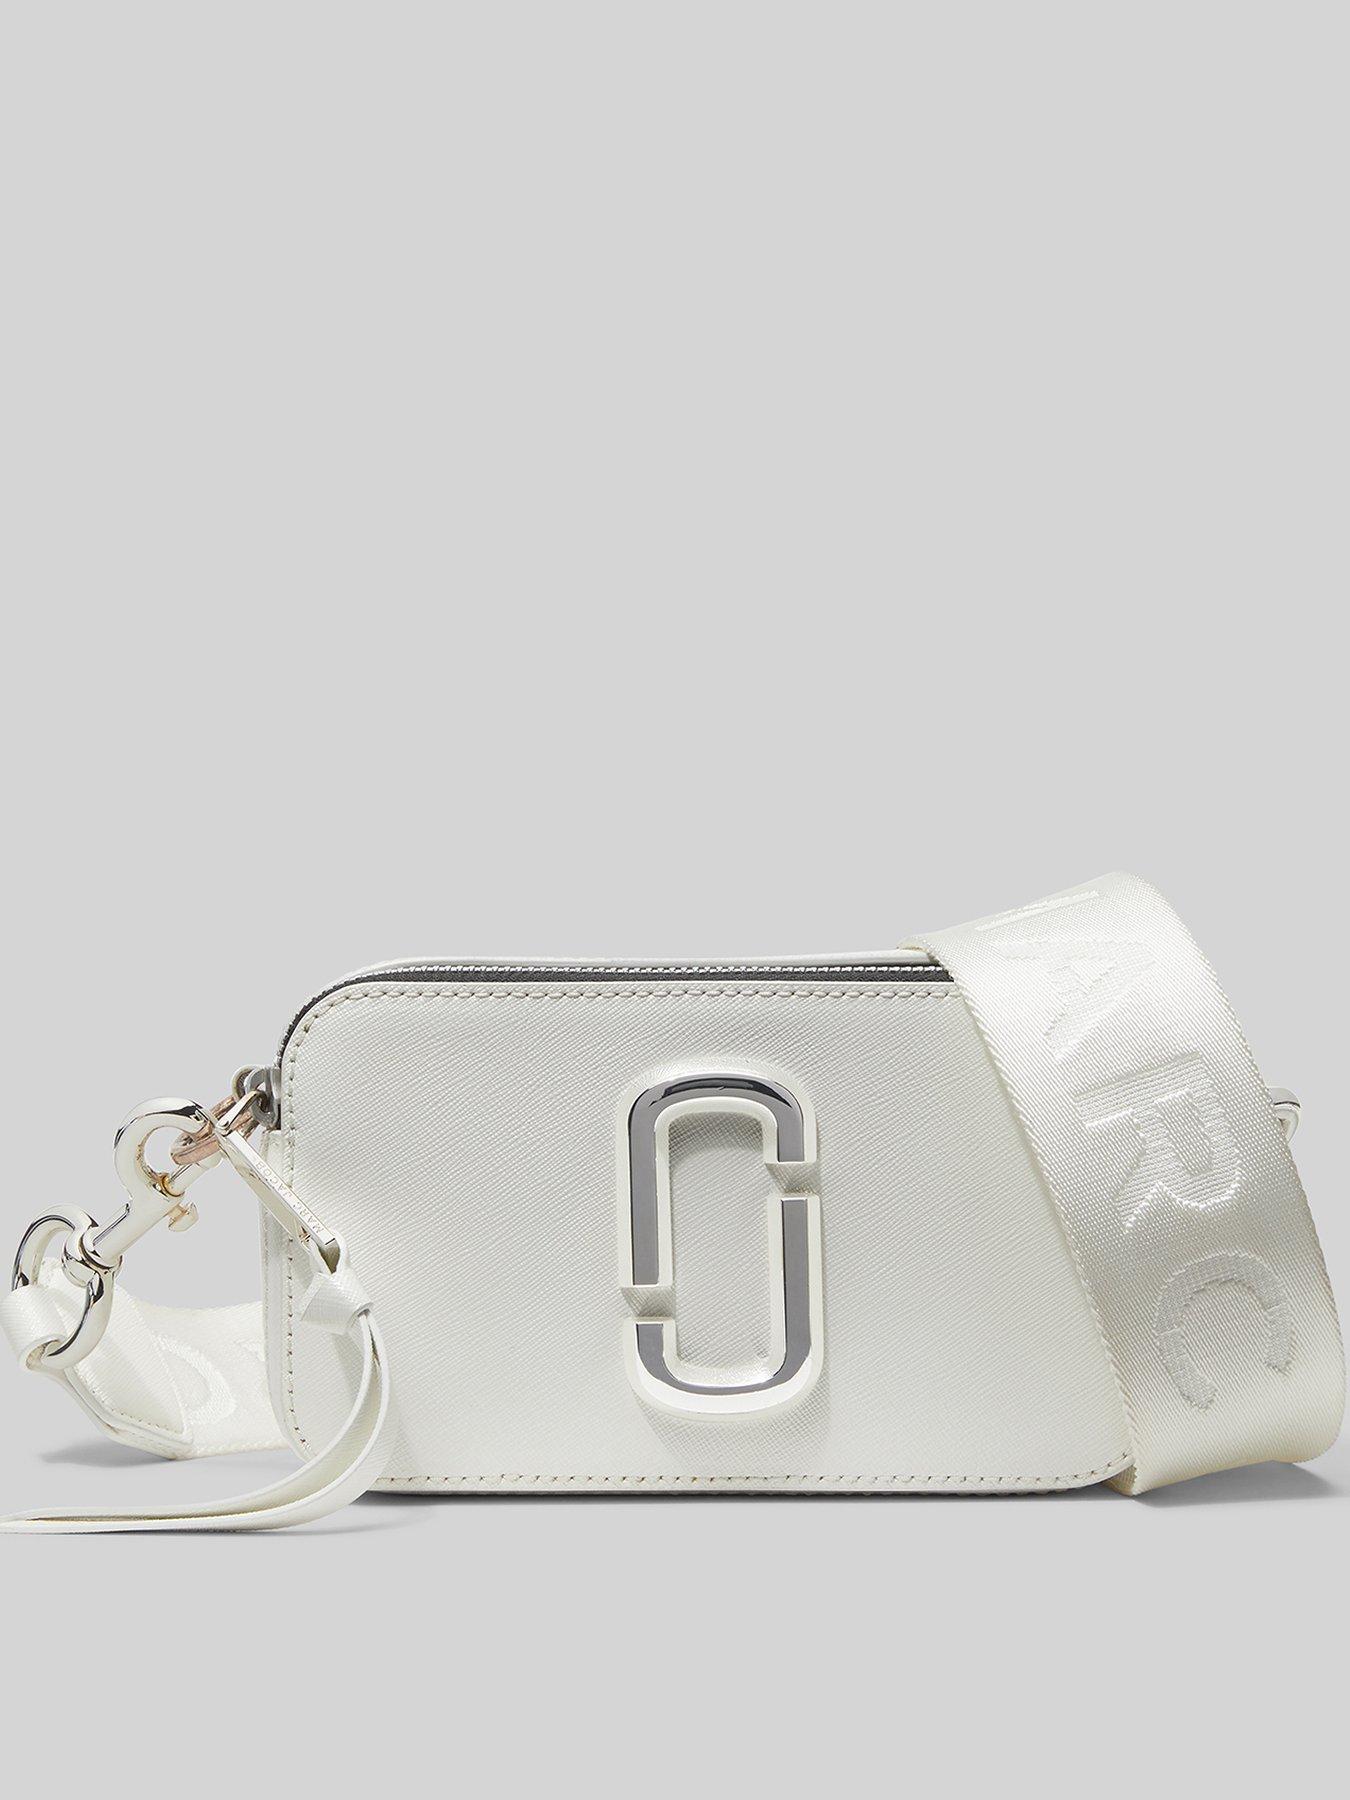 Marc Jacobs Snapshot Outfit  Marc jacobs snapshot bag, Marc